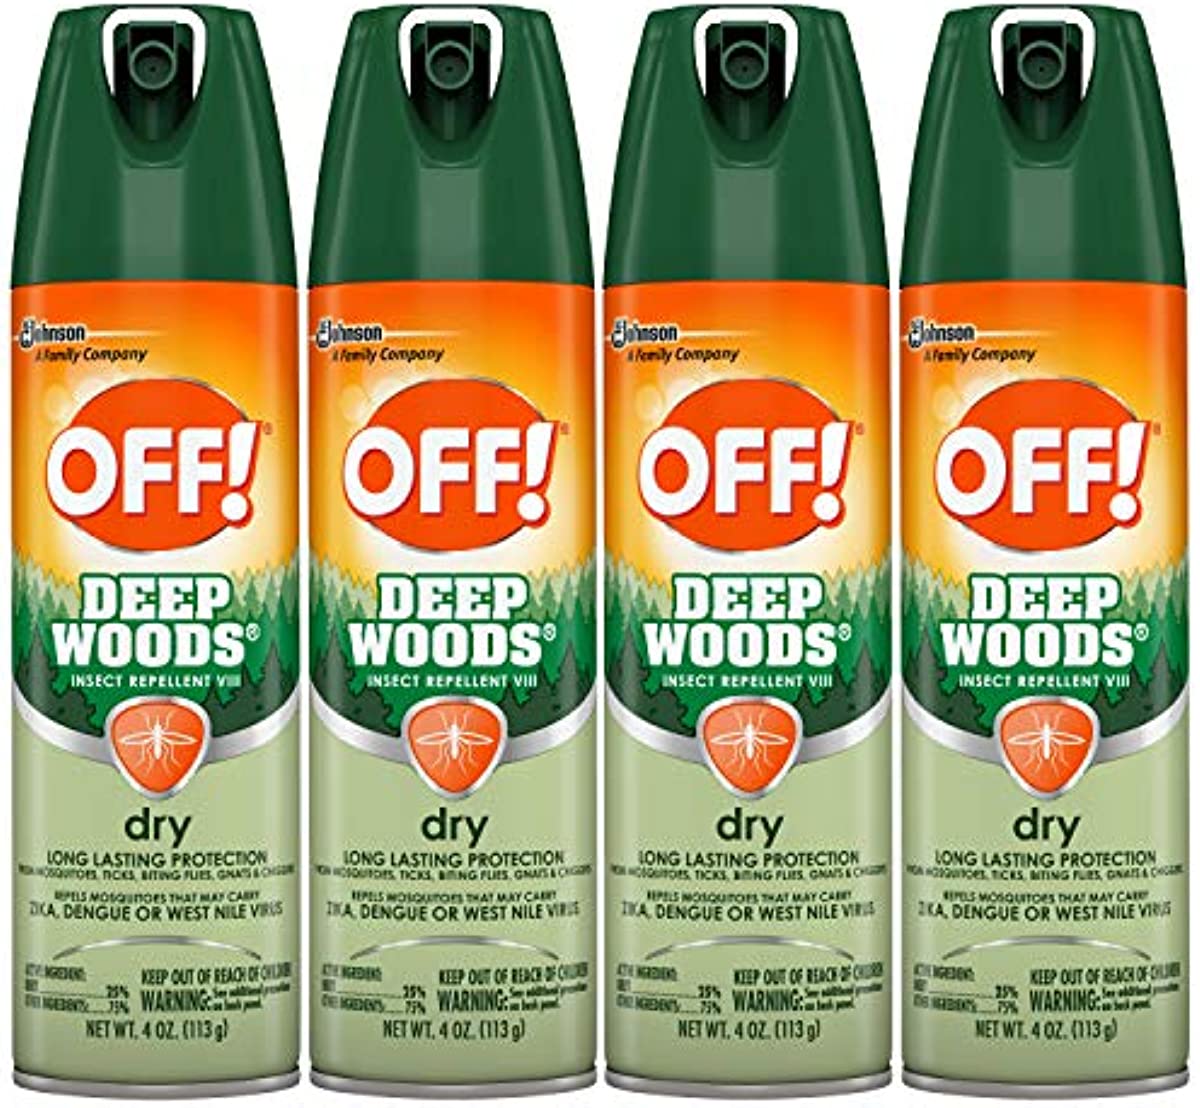 OFF! Deep Woods Insect Repellent Aerosol, Dry, Non-Greasy Formula, Bug Spray with Long Lasting Protection from Mosquitoes, 4 oz (Pack of 4)